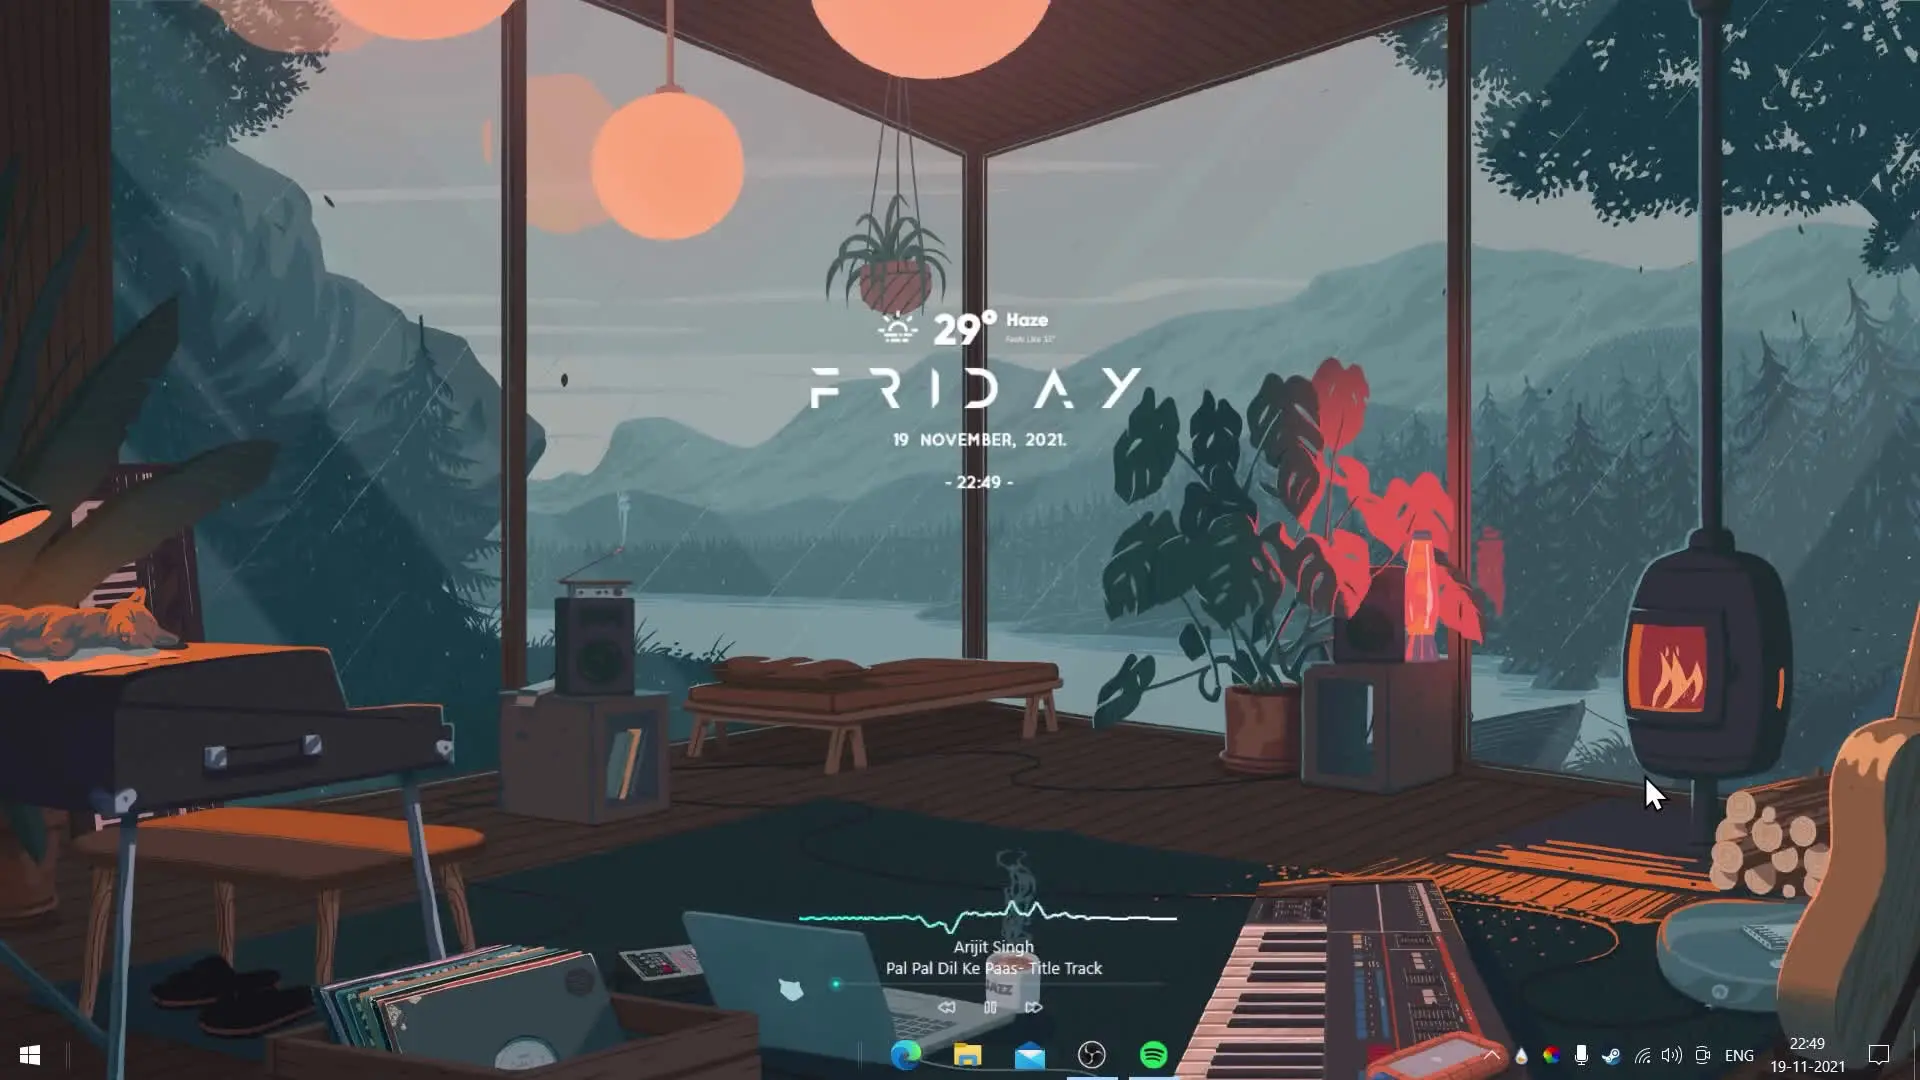 How to Make Desktop Look Awesome #4